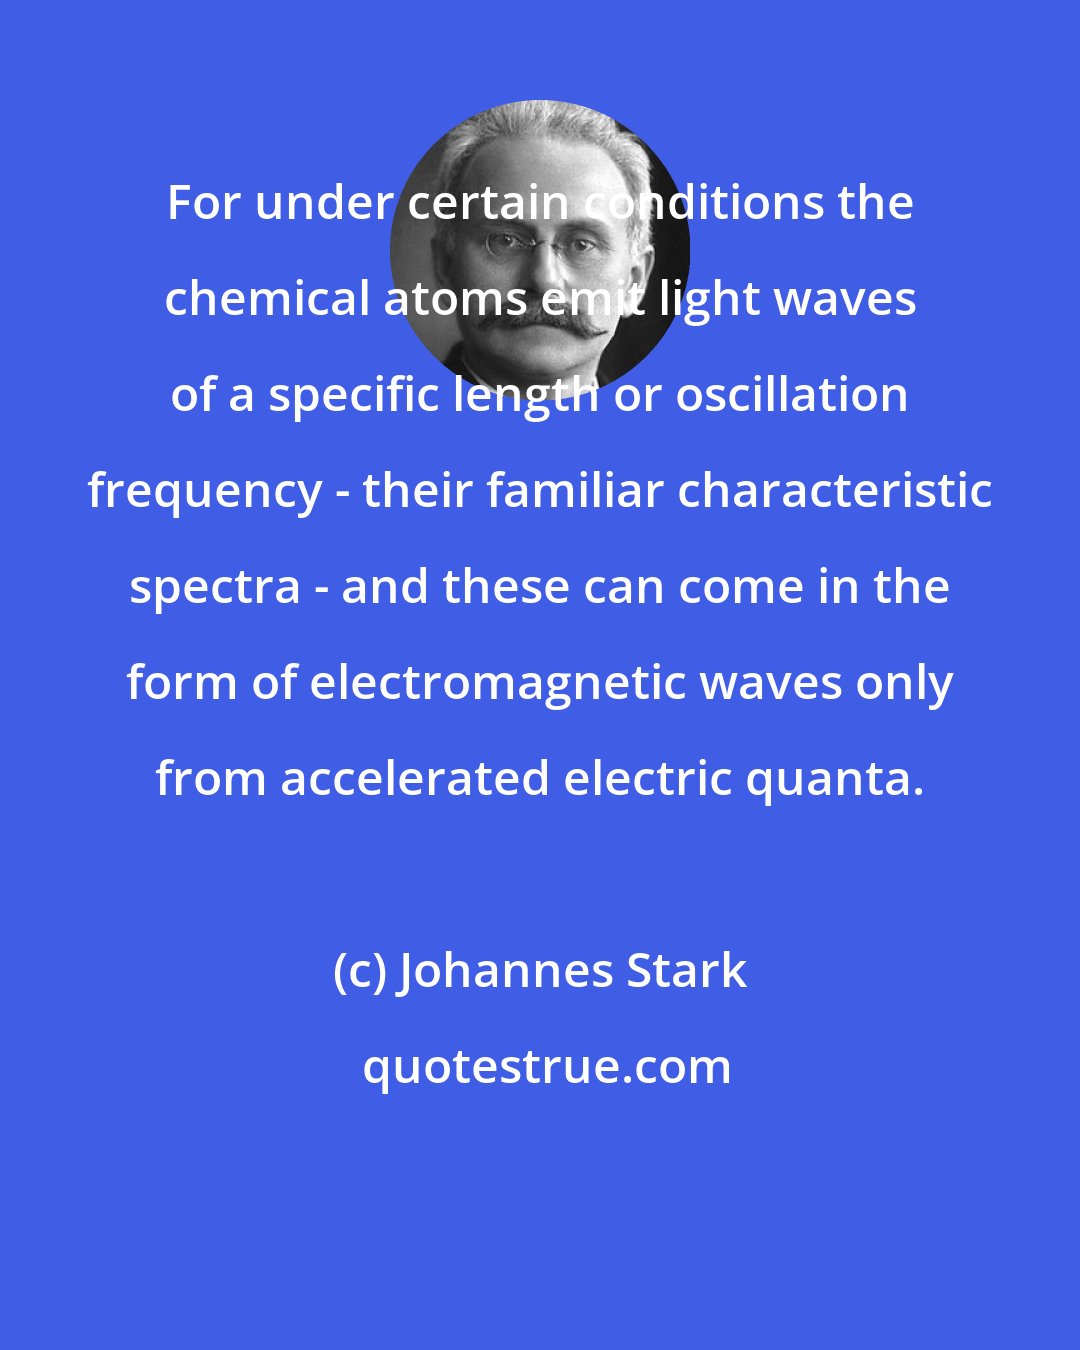 Johannes Stark: For under certain conditions the chemical atoms emit light waves of a specific length or oscillation frequency - their familiar characteristic spectra - and these can come in the form of electromagnetic waves only from accelerated electric quanta.